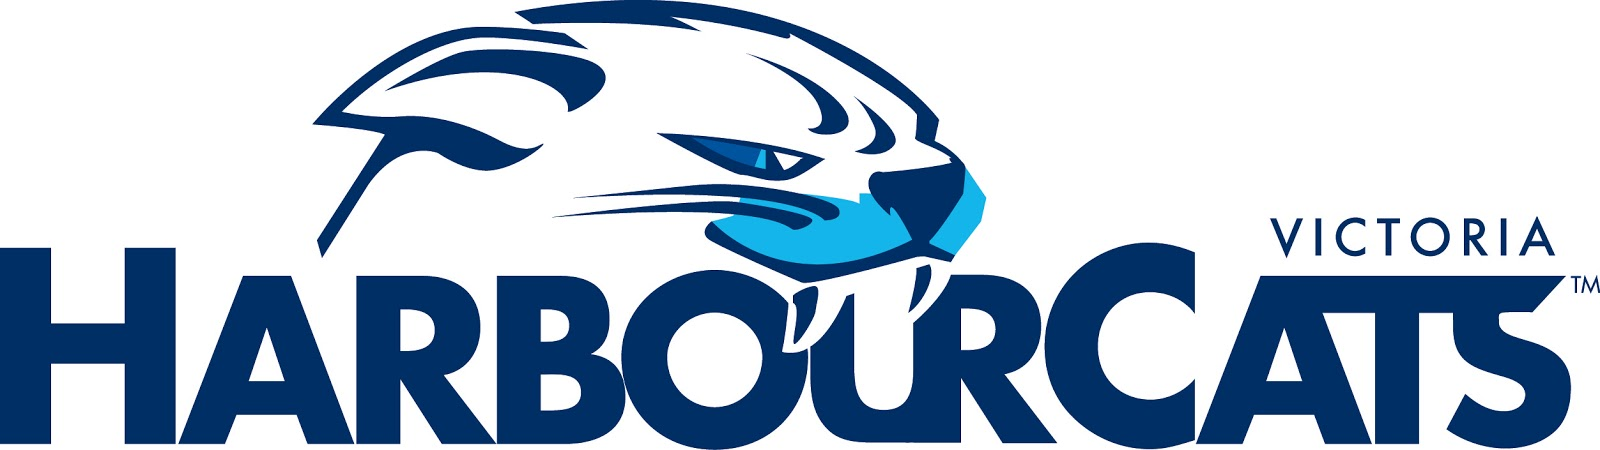 Victoria HarbourCats 2013-Pres Primary logo iron on transfers for T-shirts